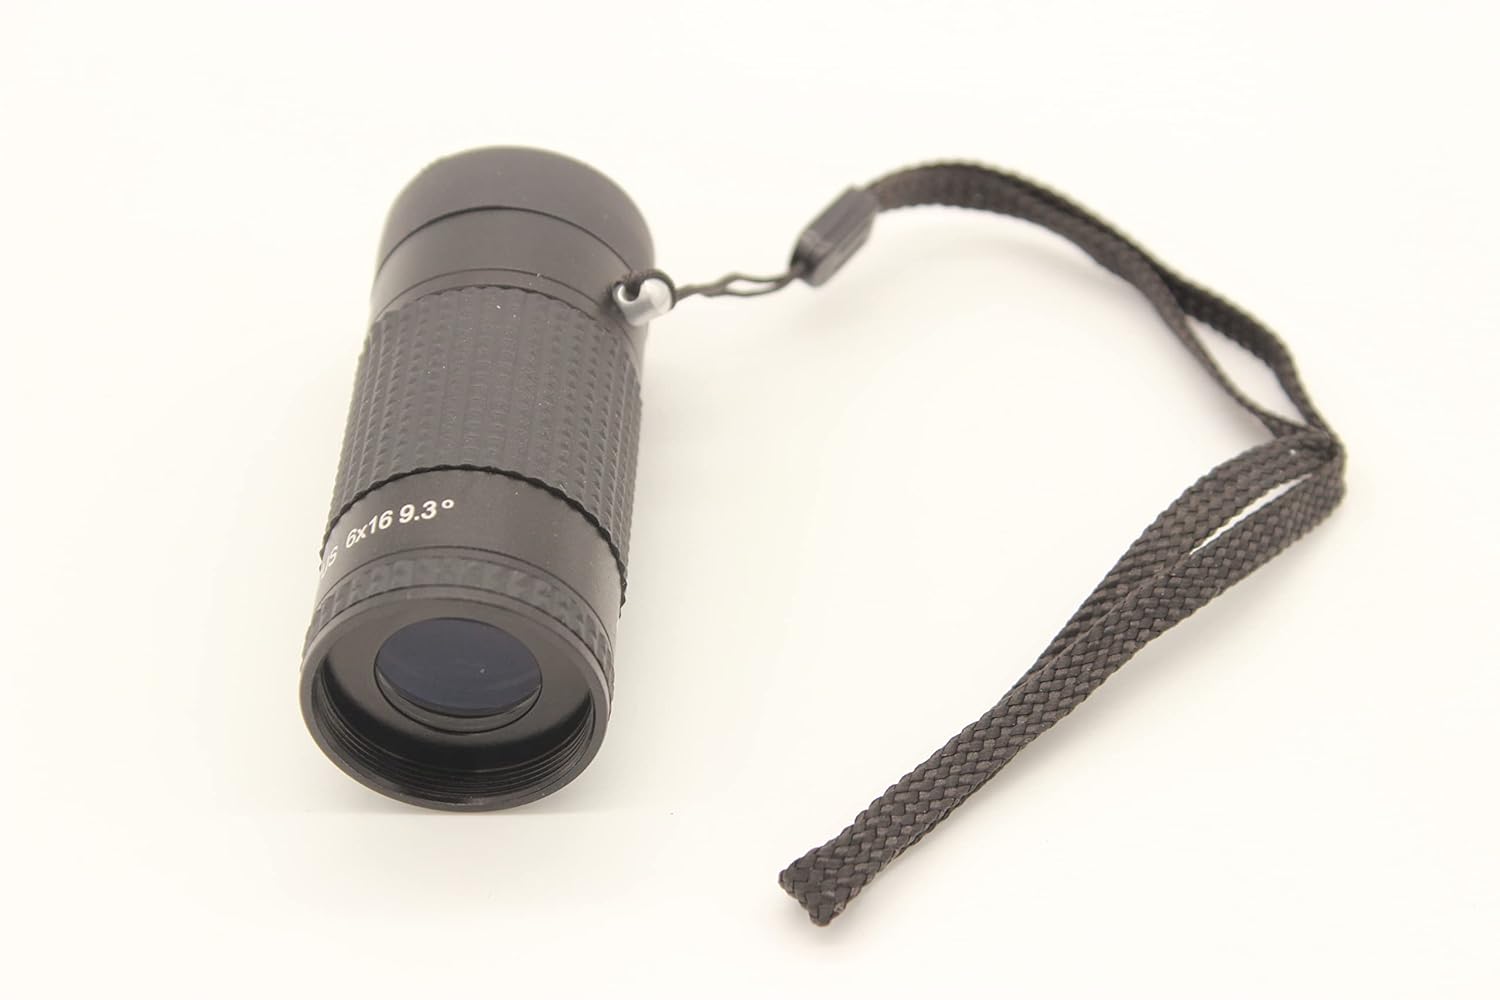 (Basic-Version) 6x16mm Extra Short Focus(Close Focus) Monocular for Short/Long Distance for Vision Impairment Monocular for Bird Watching, Hunting, Fishing, Sport Events